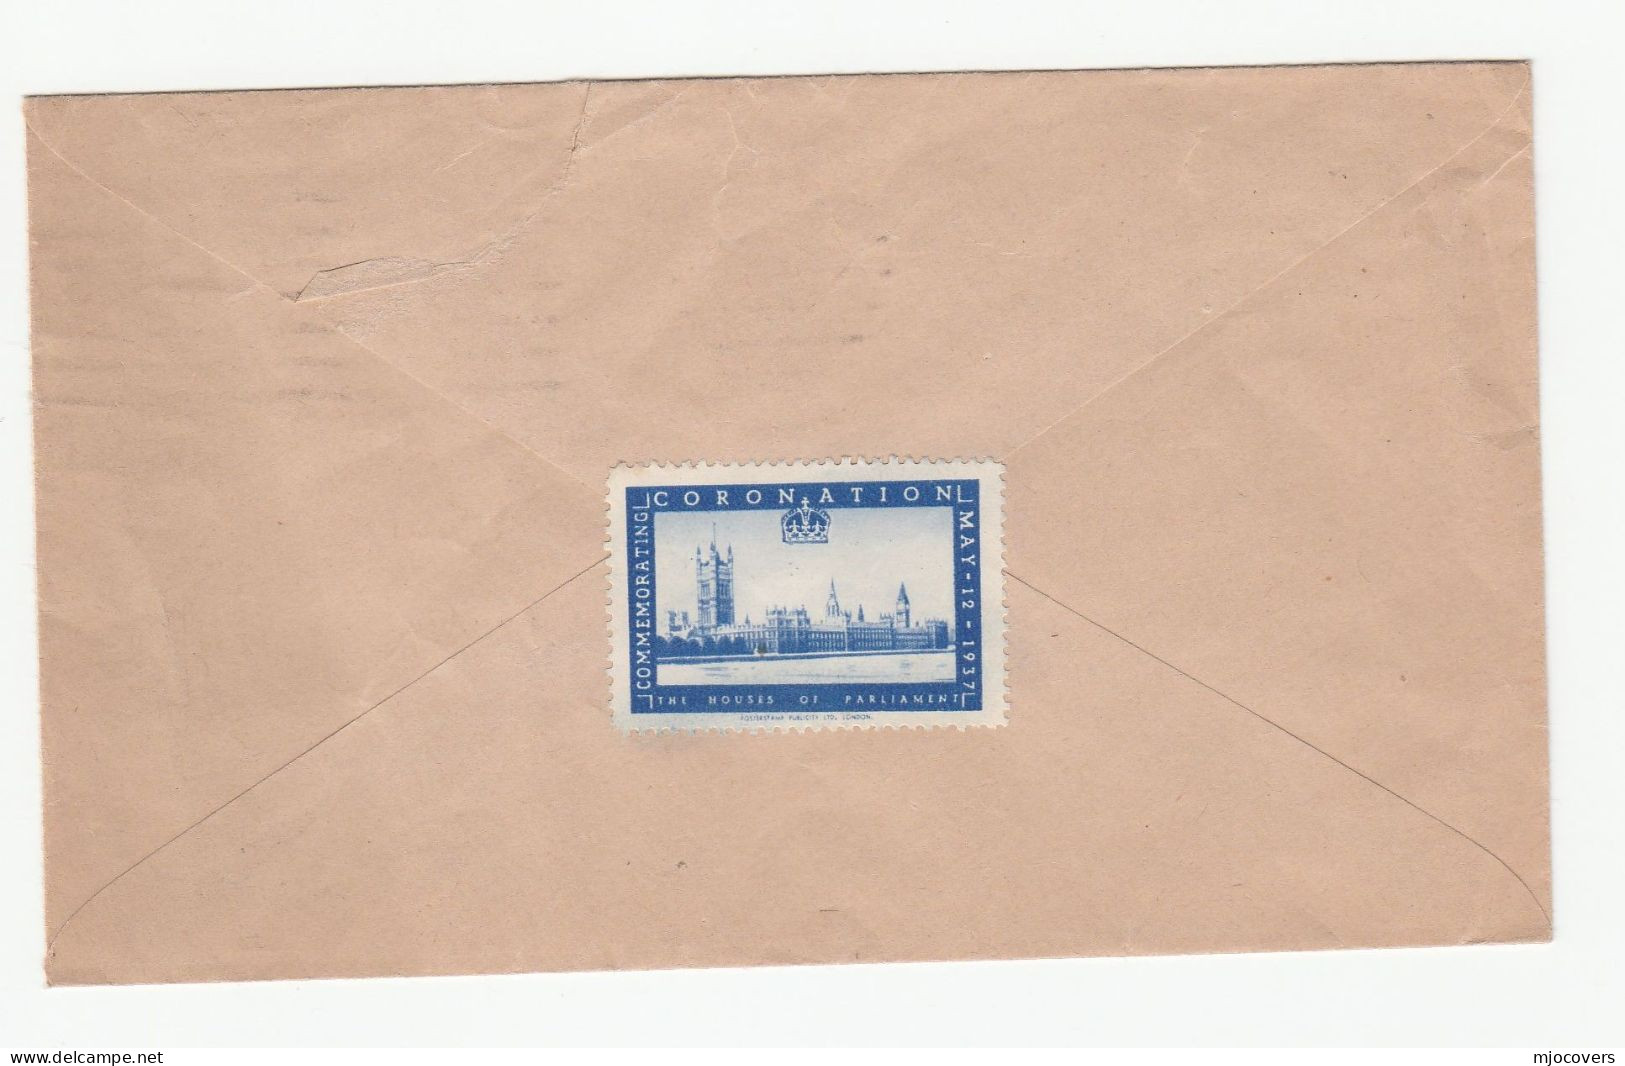 1937 Houses Of Parliament CORONATION Commemorative Label Seal GB E8 Stamps Cover Eviii Royalty - Covers & Documents